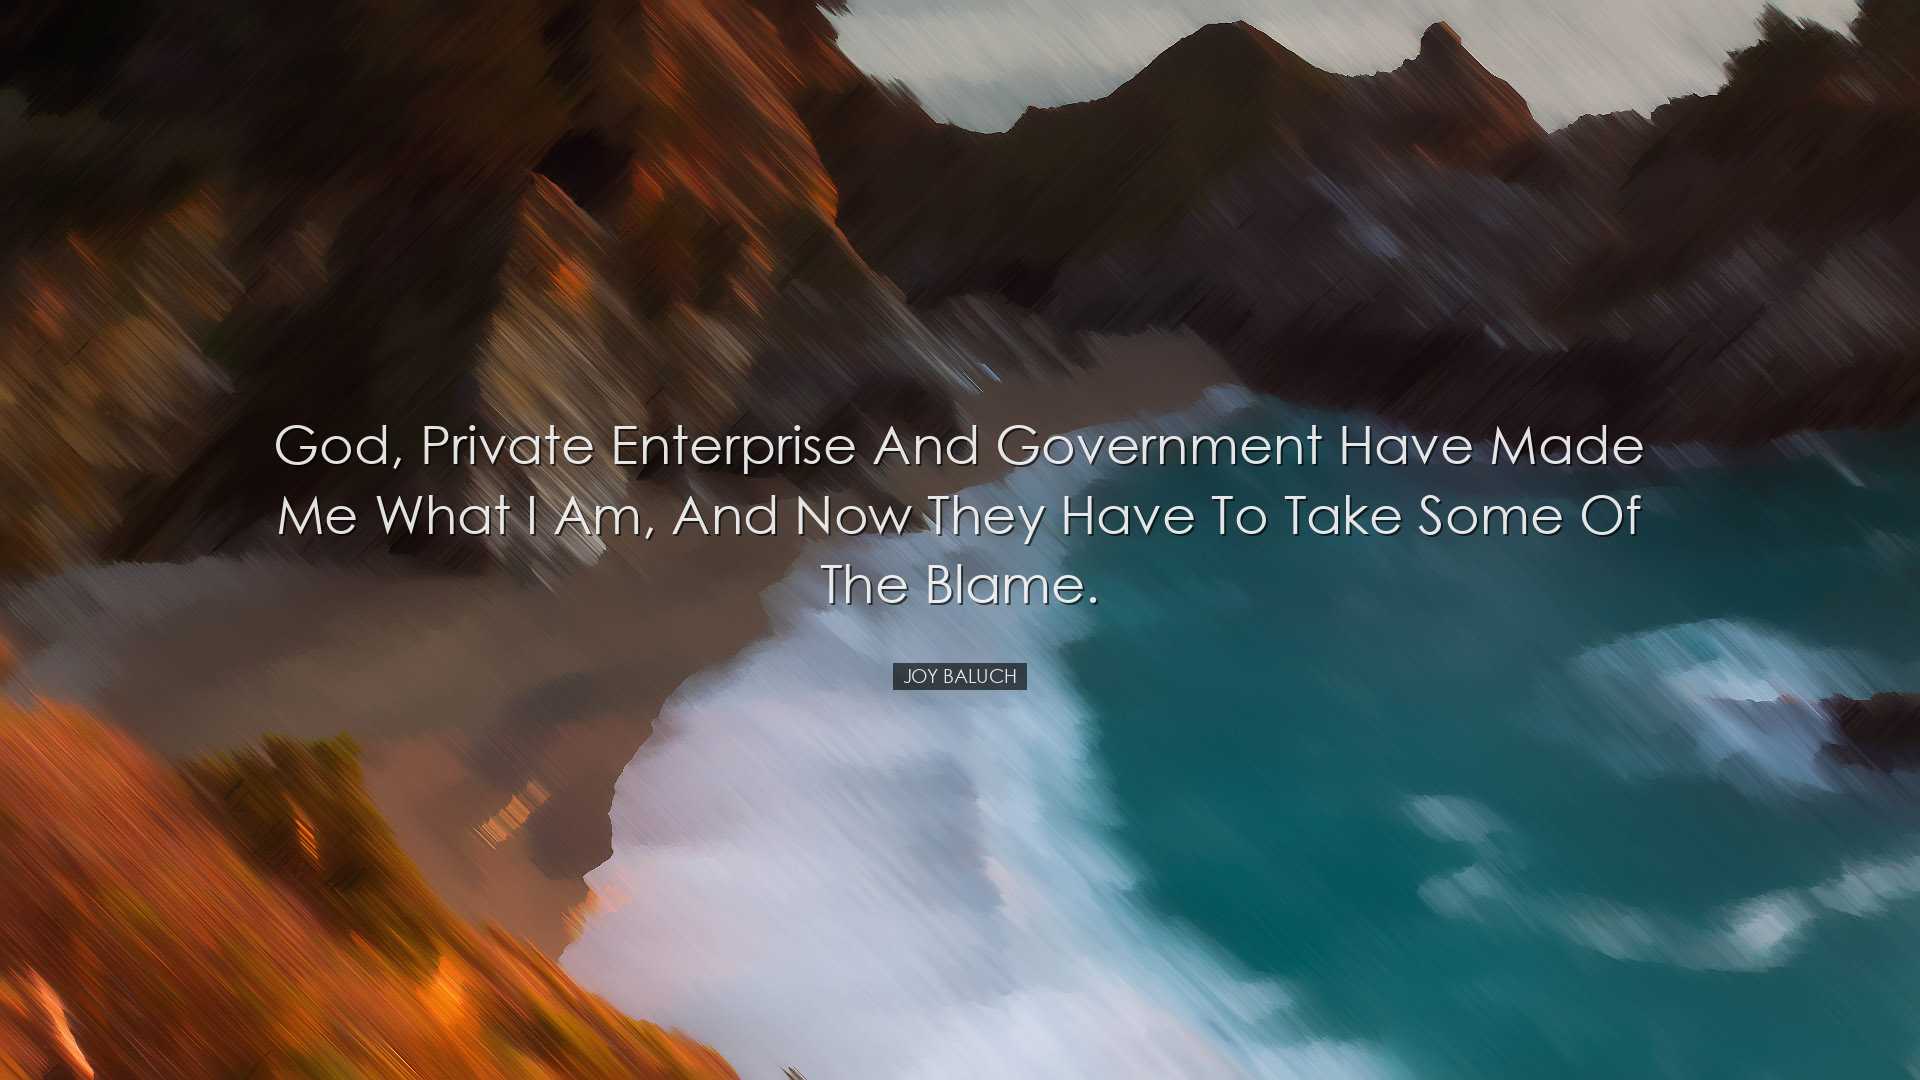 God, Private Enterprise and government have made me what I am, and